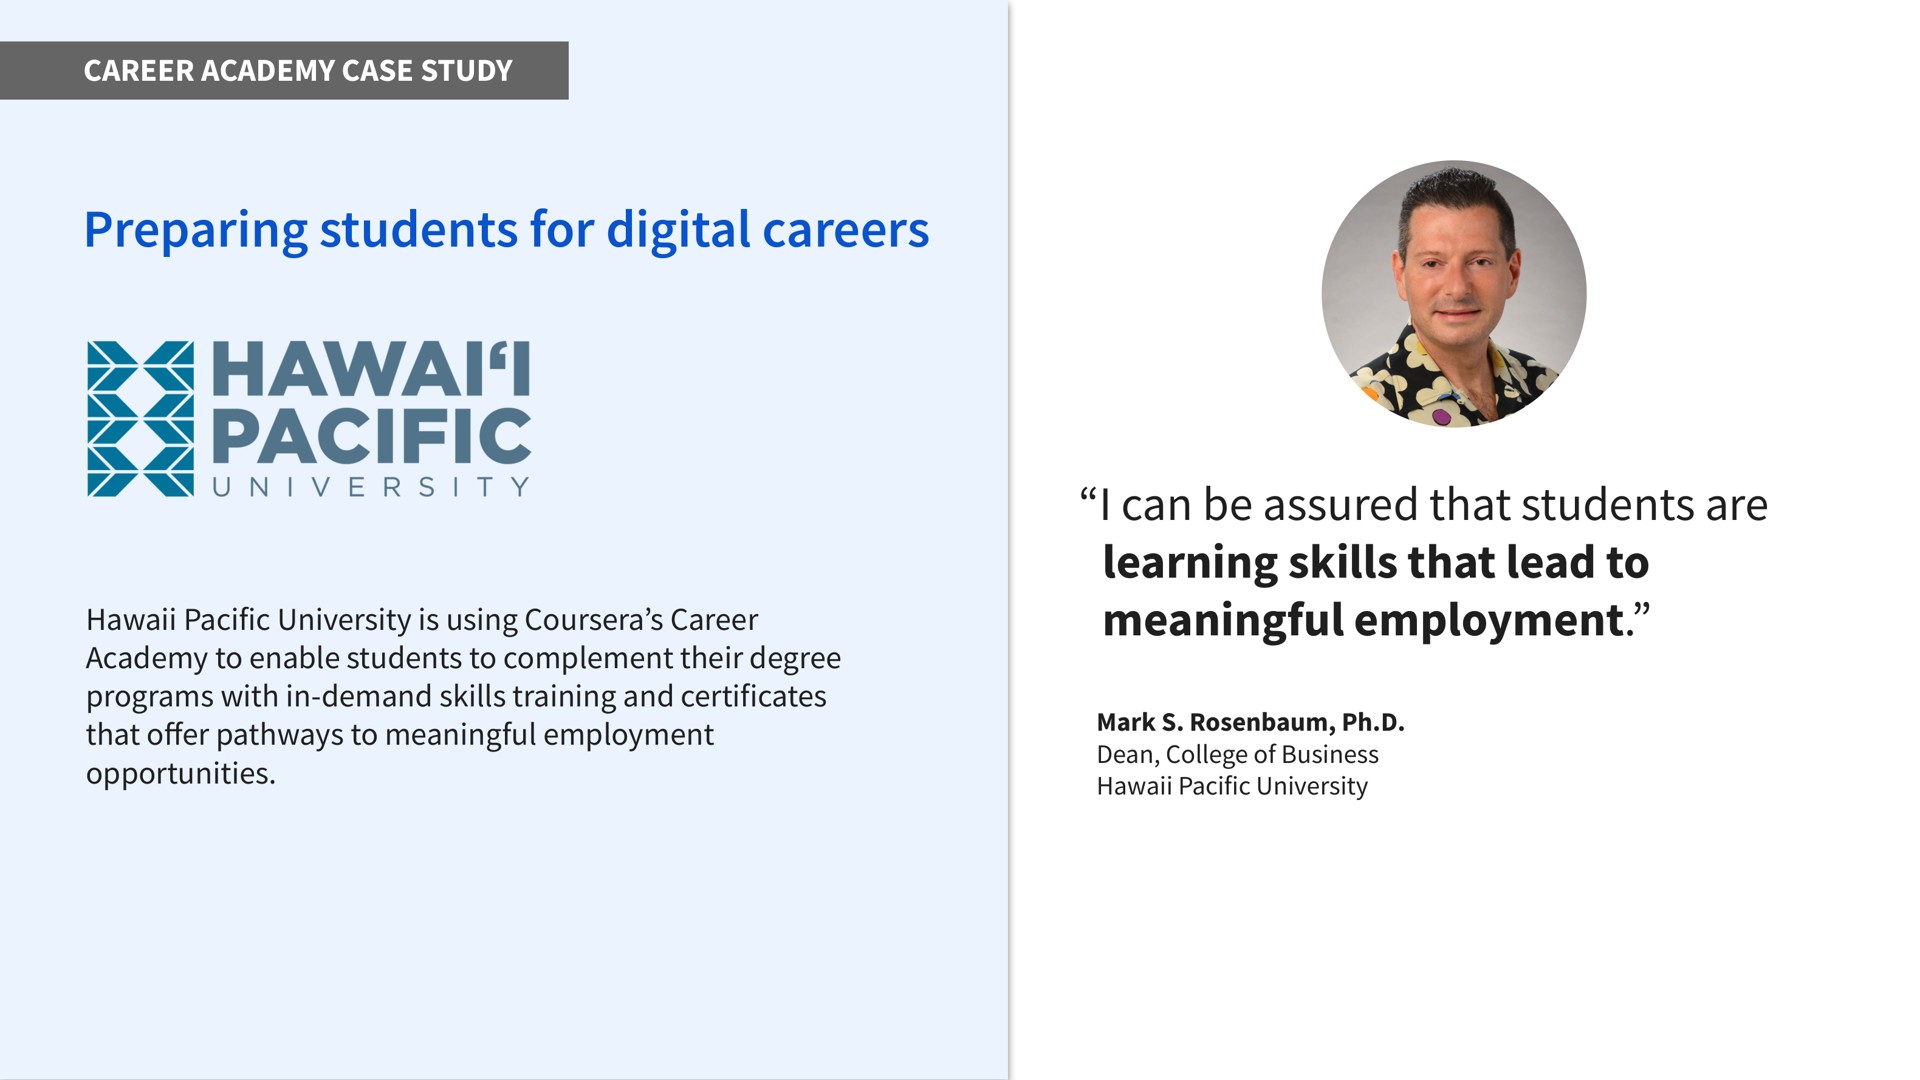 career academy case study career academy case study preparing students for digital careers pacific university is using career academy to enable students to complement their degree programs with in demand skills training and certificates that pathways to meaningful employment opportunities i can be assured that students are learning skills that lead to meaningful employment mark dean college of business pacific university | Coursera